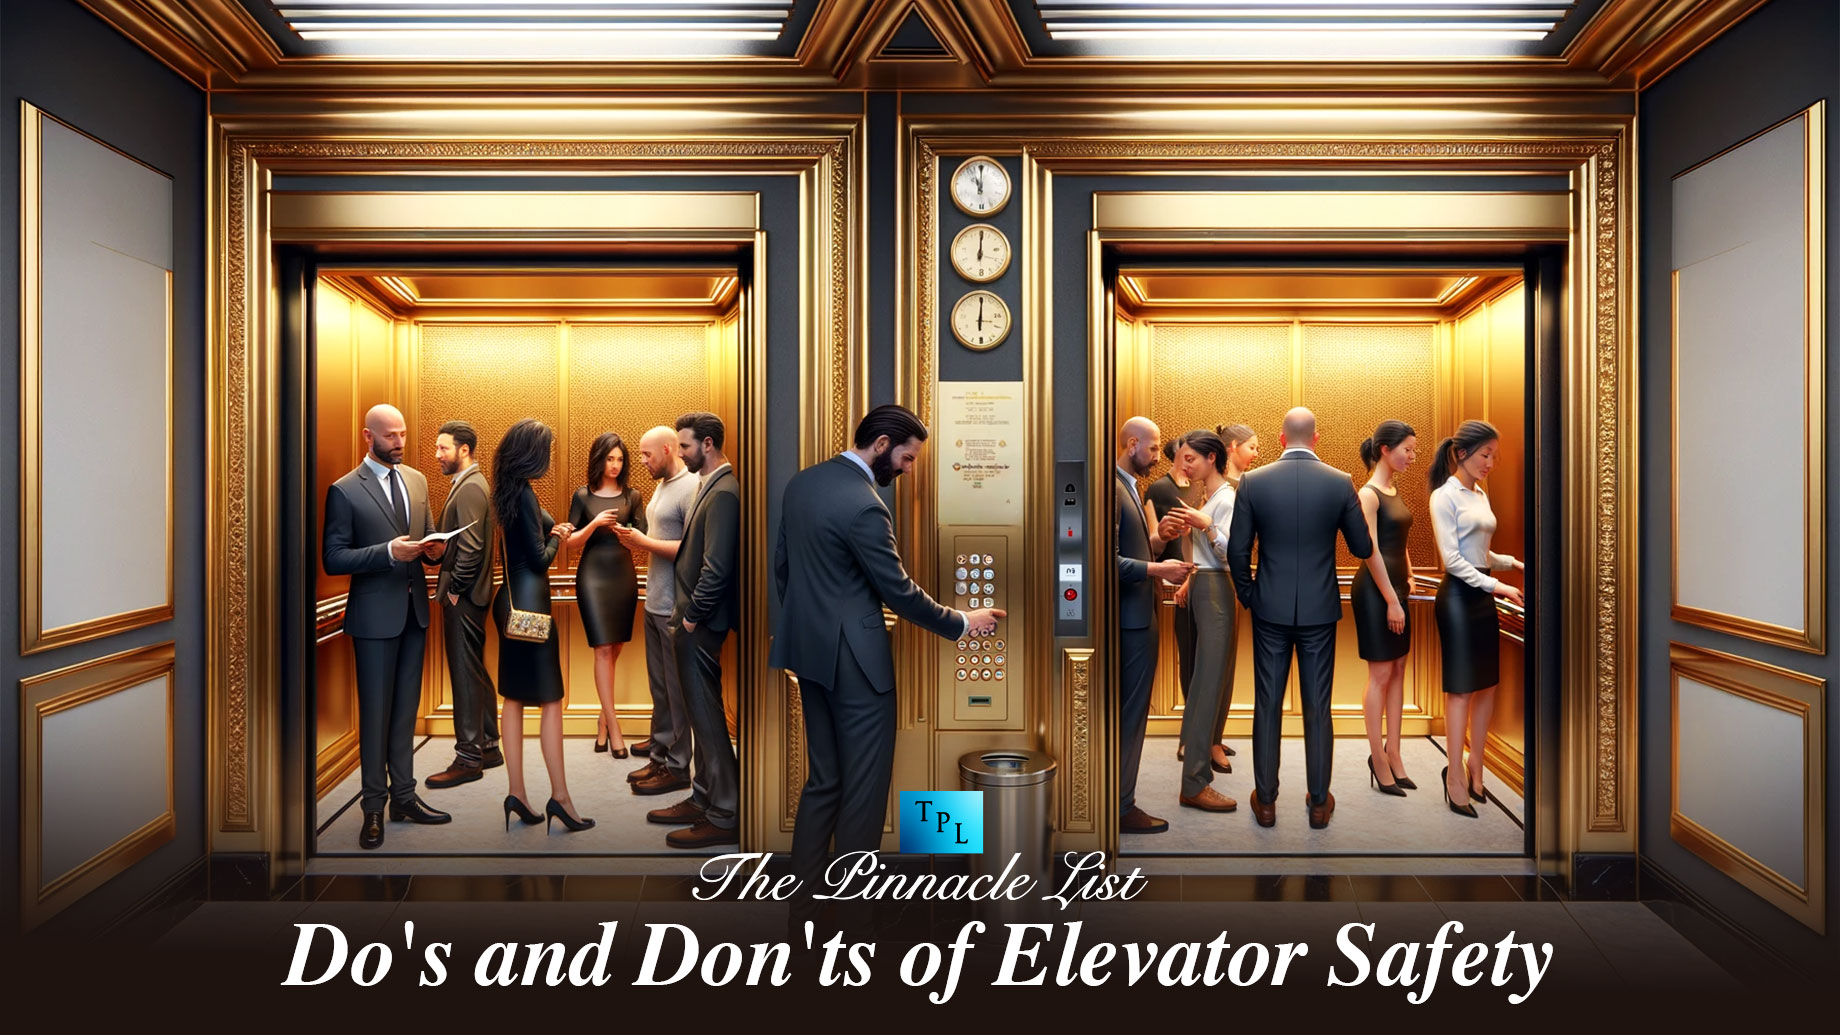 Do's and Don'ts of Elevator Safety